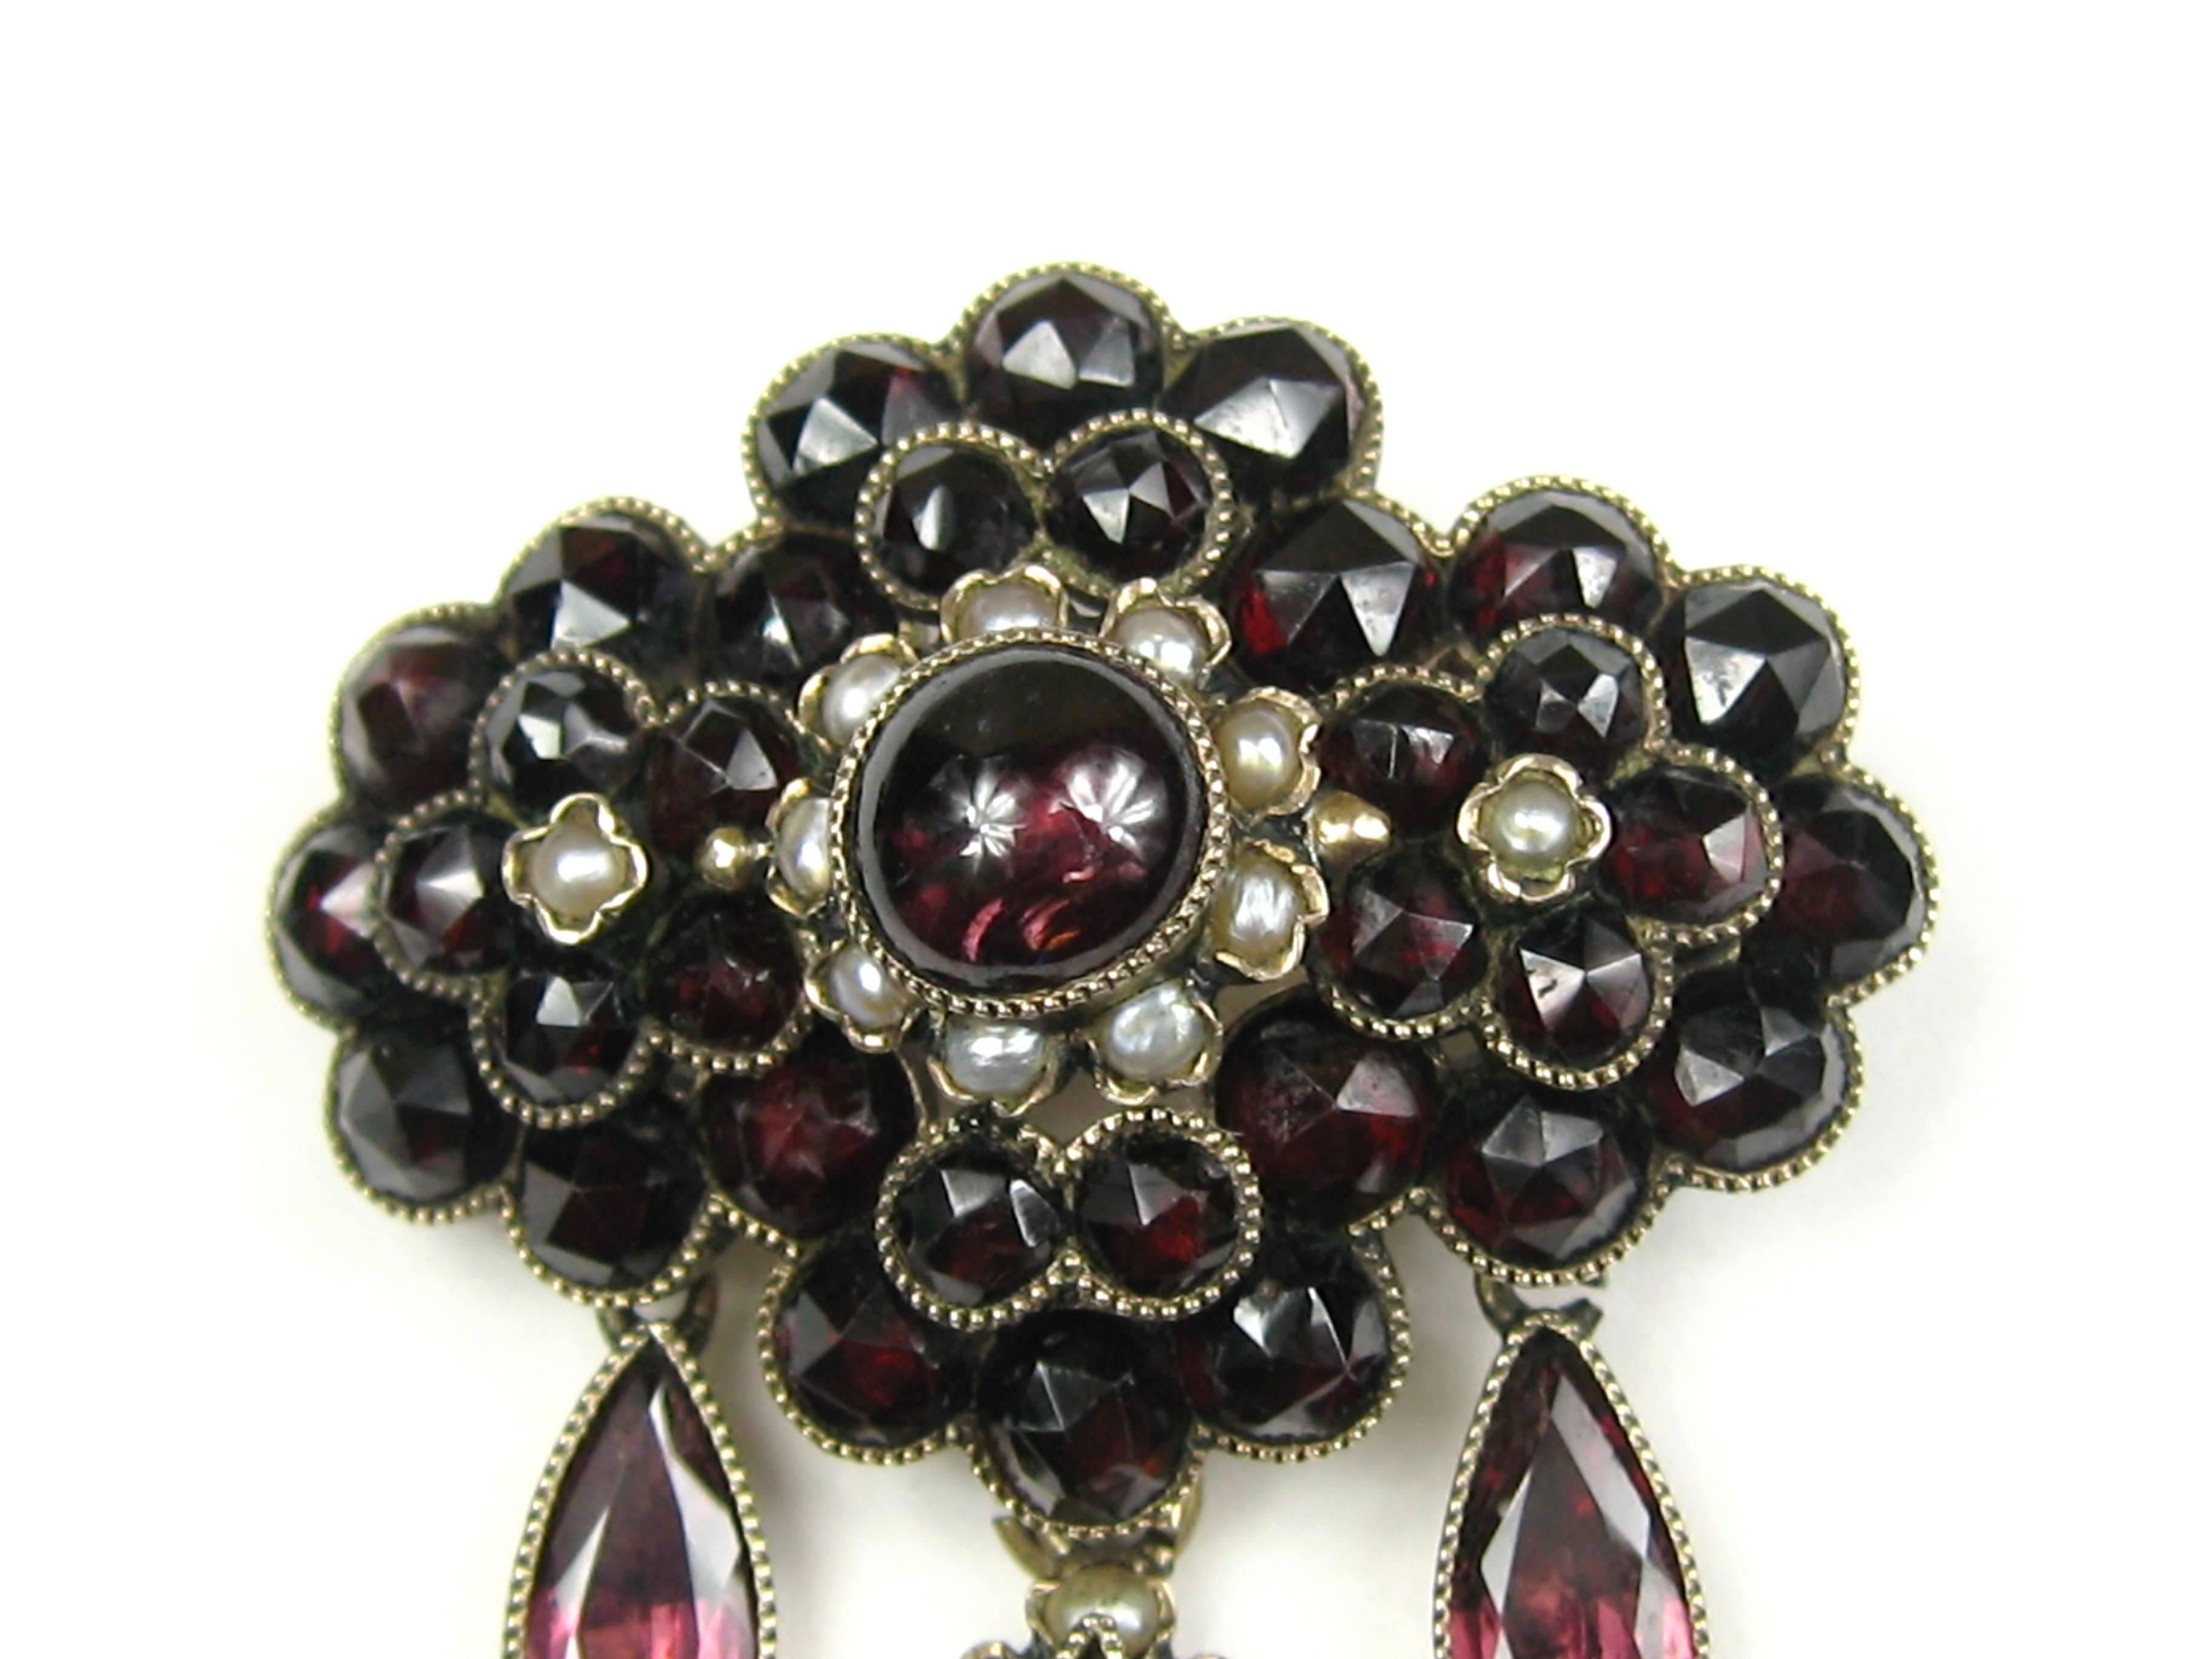 14K Gold Bohemian Garnet & Seed Pearl Brooch Pin. Offered for sale is this truly spectacular Pin. This is one of those rare hard to find Antiques pieces! Center cabochon Garnet as well as bezel set garnets that make up a floral motif. It has 3 Tear